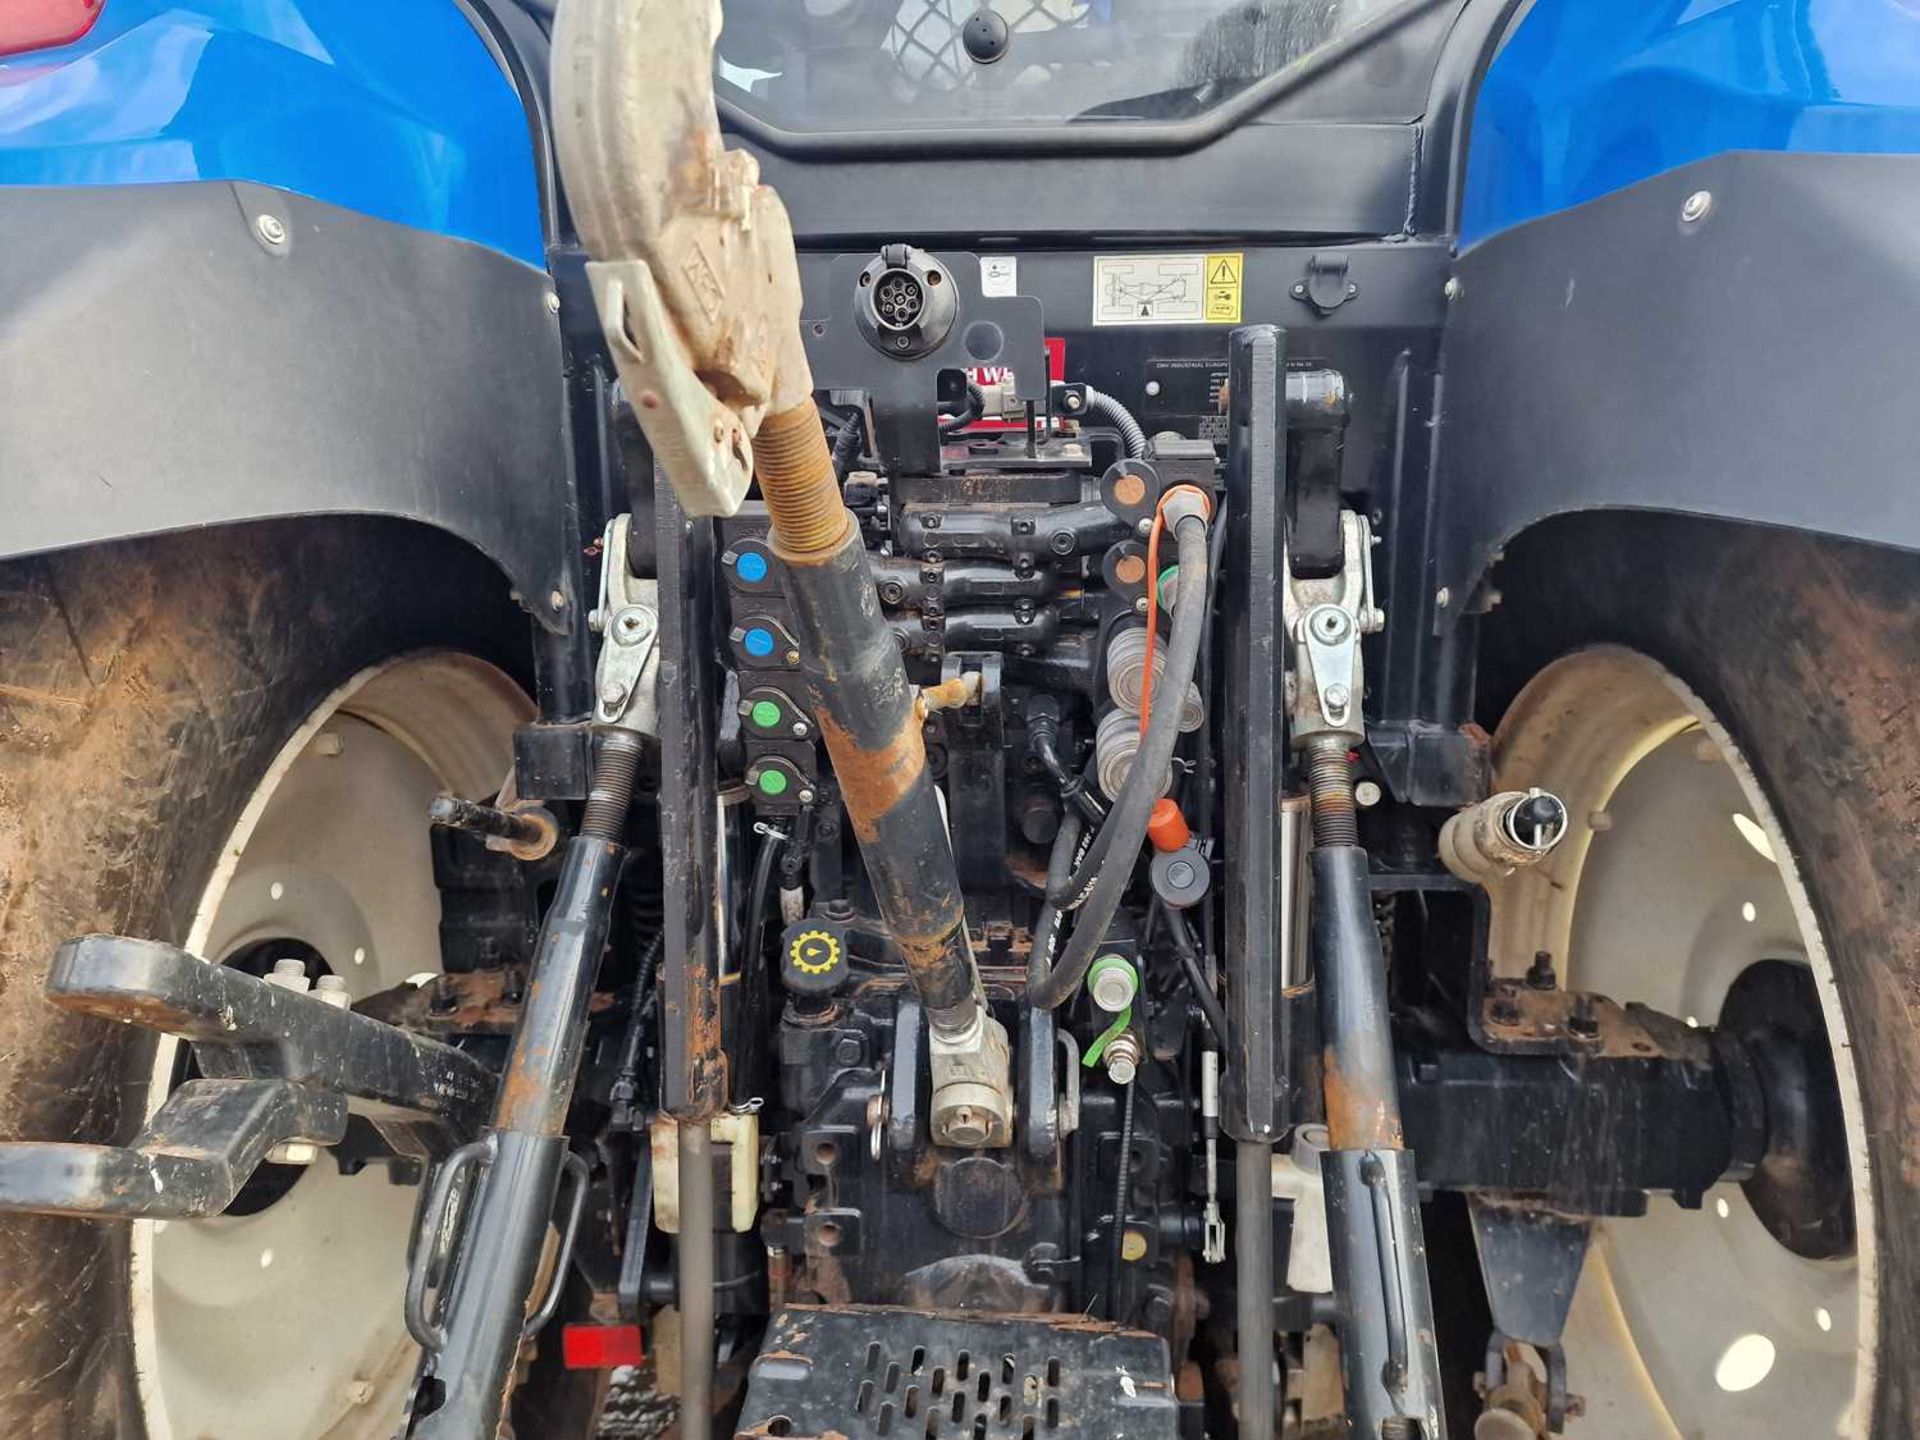 2019 New Holland T6.180 4WD Tractor, Cab Suspension, 3 Spool Valves, Push Out Hitch, A/C - Image 14 of 28